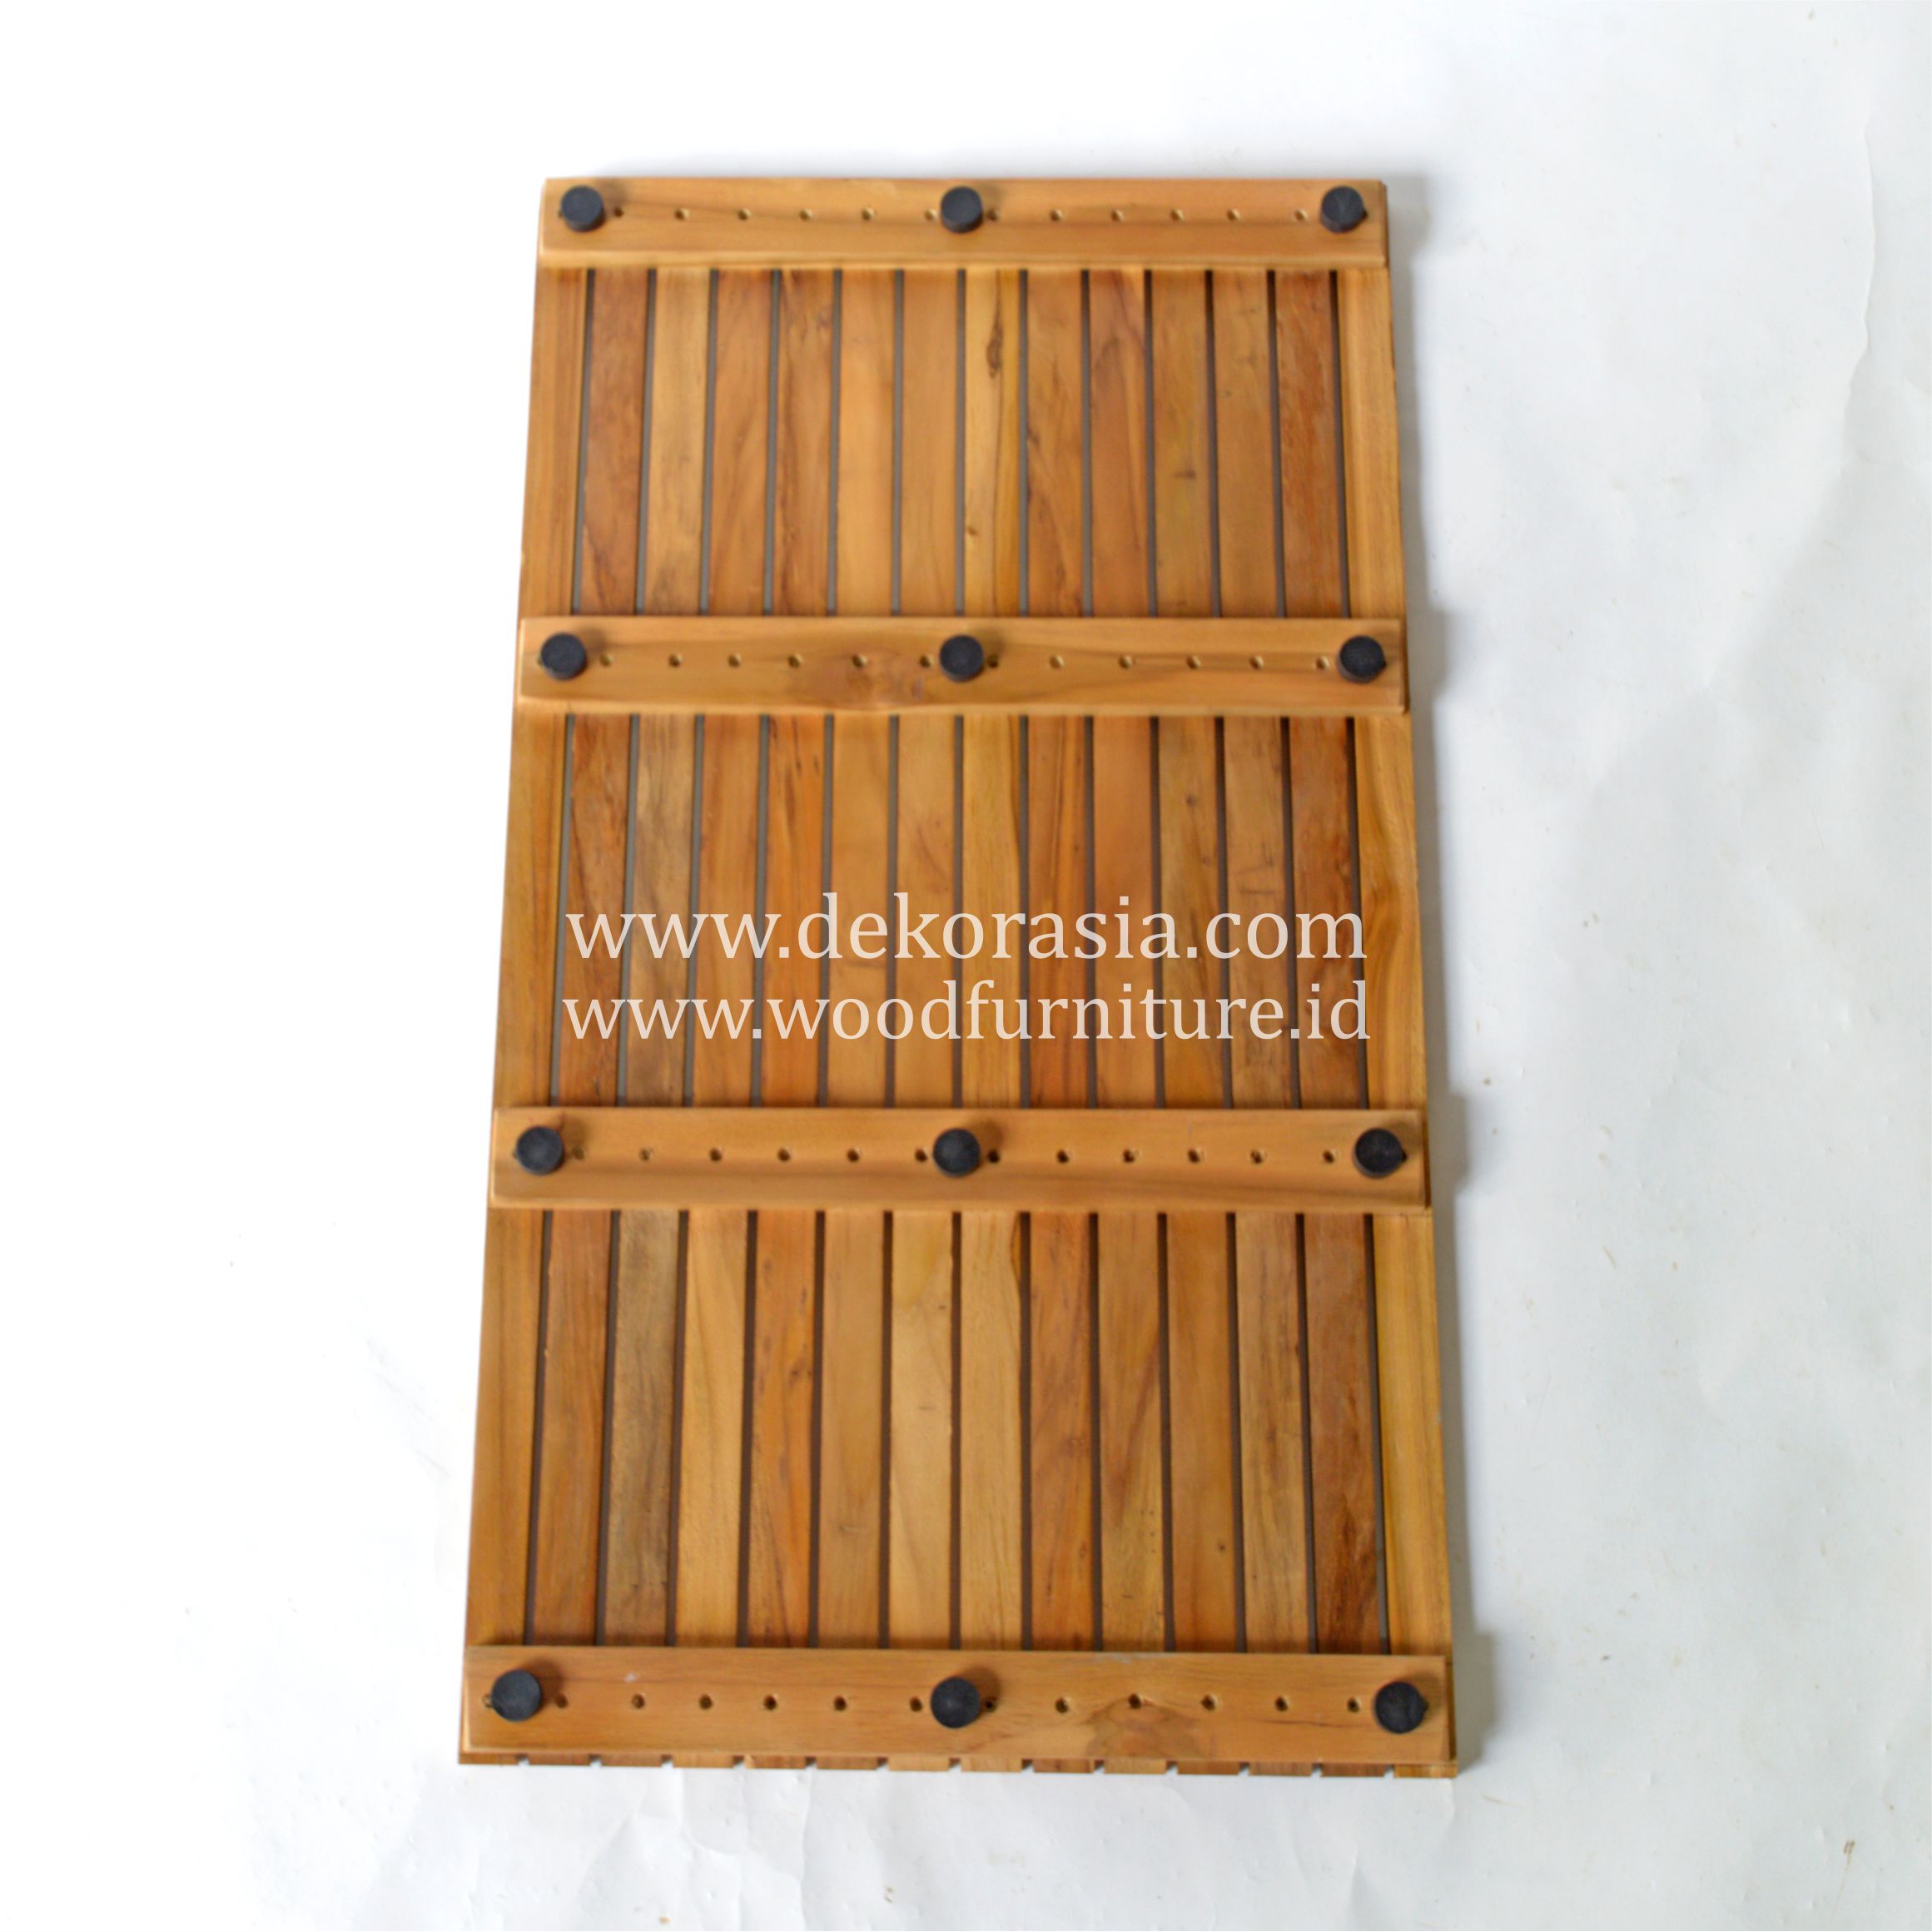 Teak Shower and Bath String Mat for Indoor / Outdoor Use, Pool, Hot Tub Flooring Decor and Protector